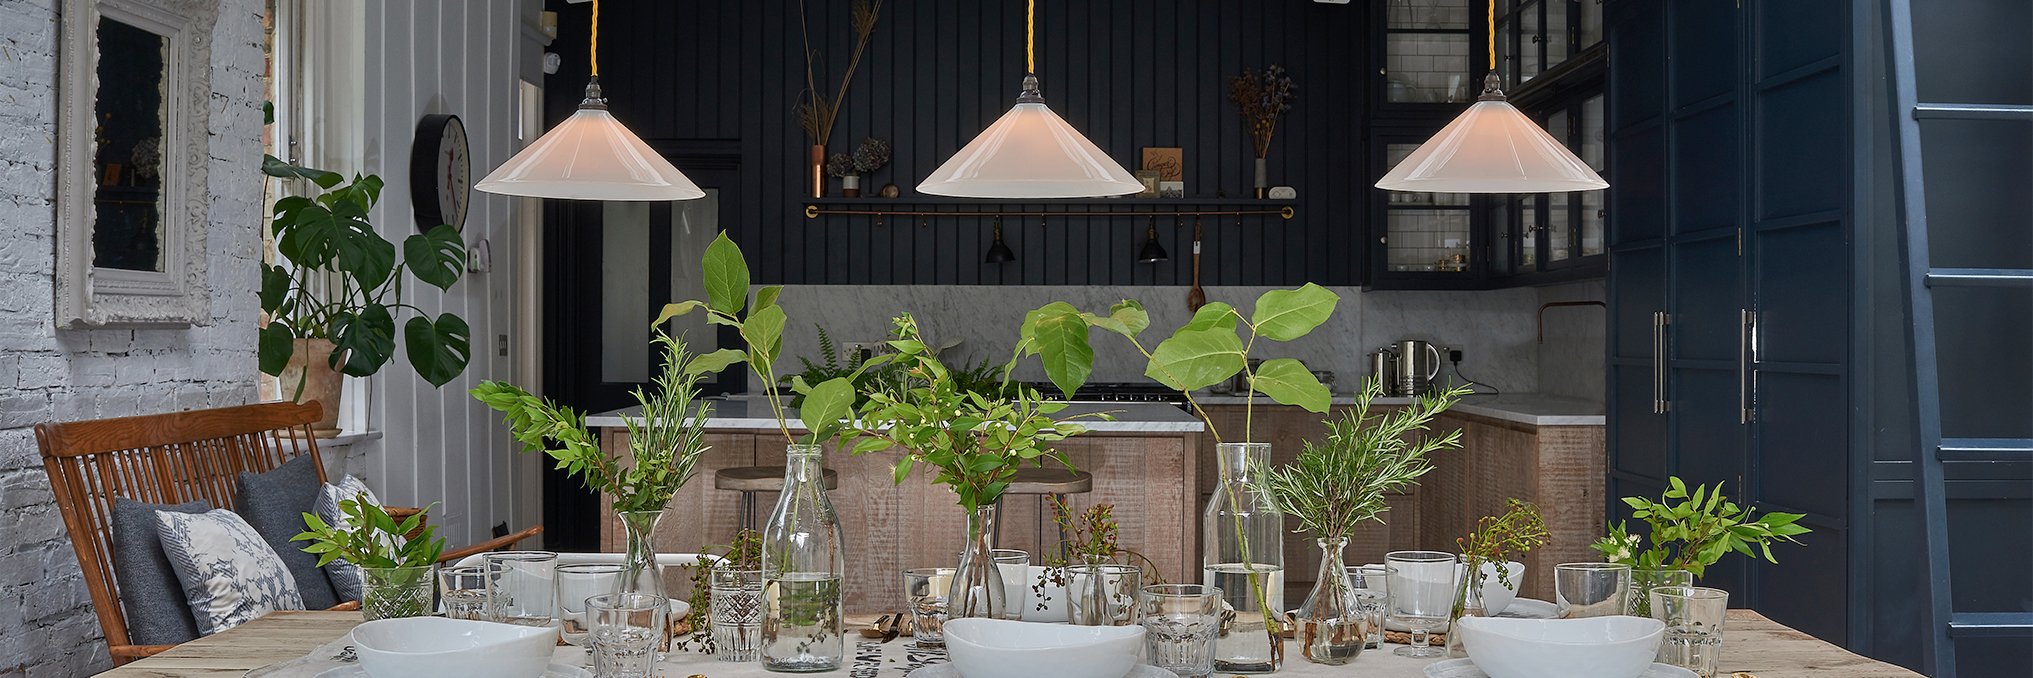 Three white Hay pendant lights suspended over a kitchen island. Decorated with multiple vases of plants, part of the Hay lighting collection.